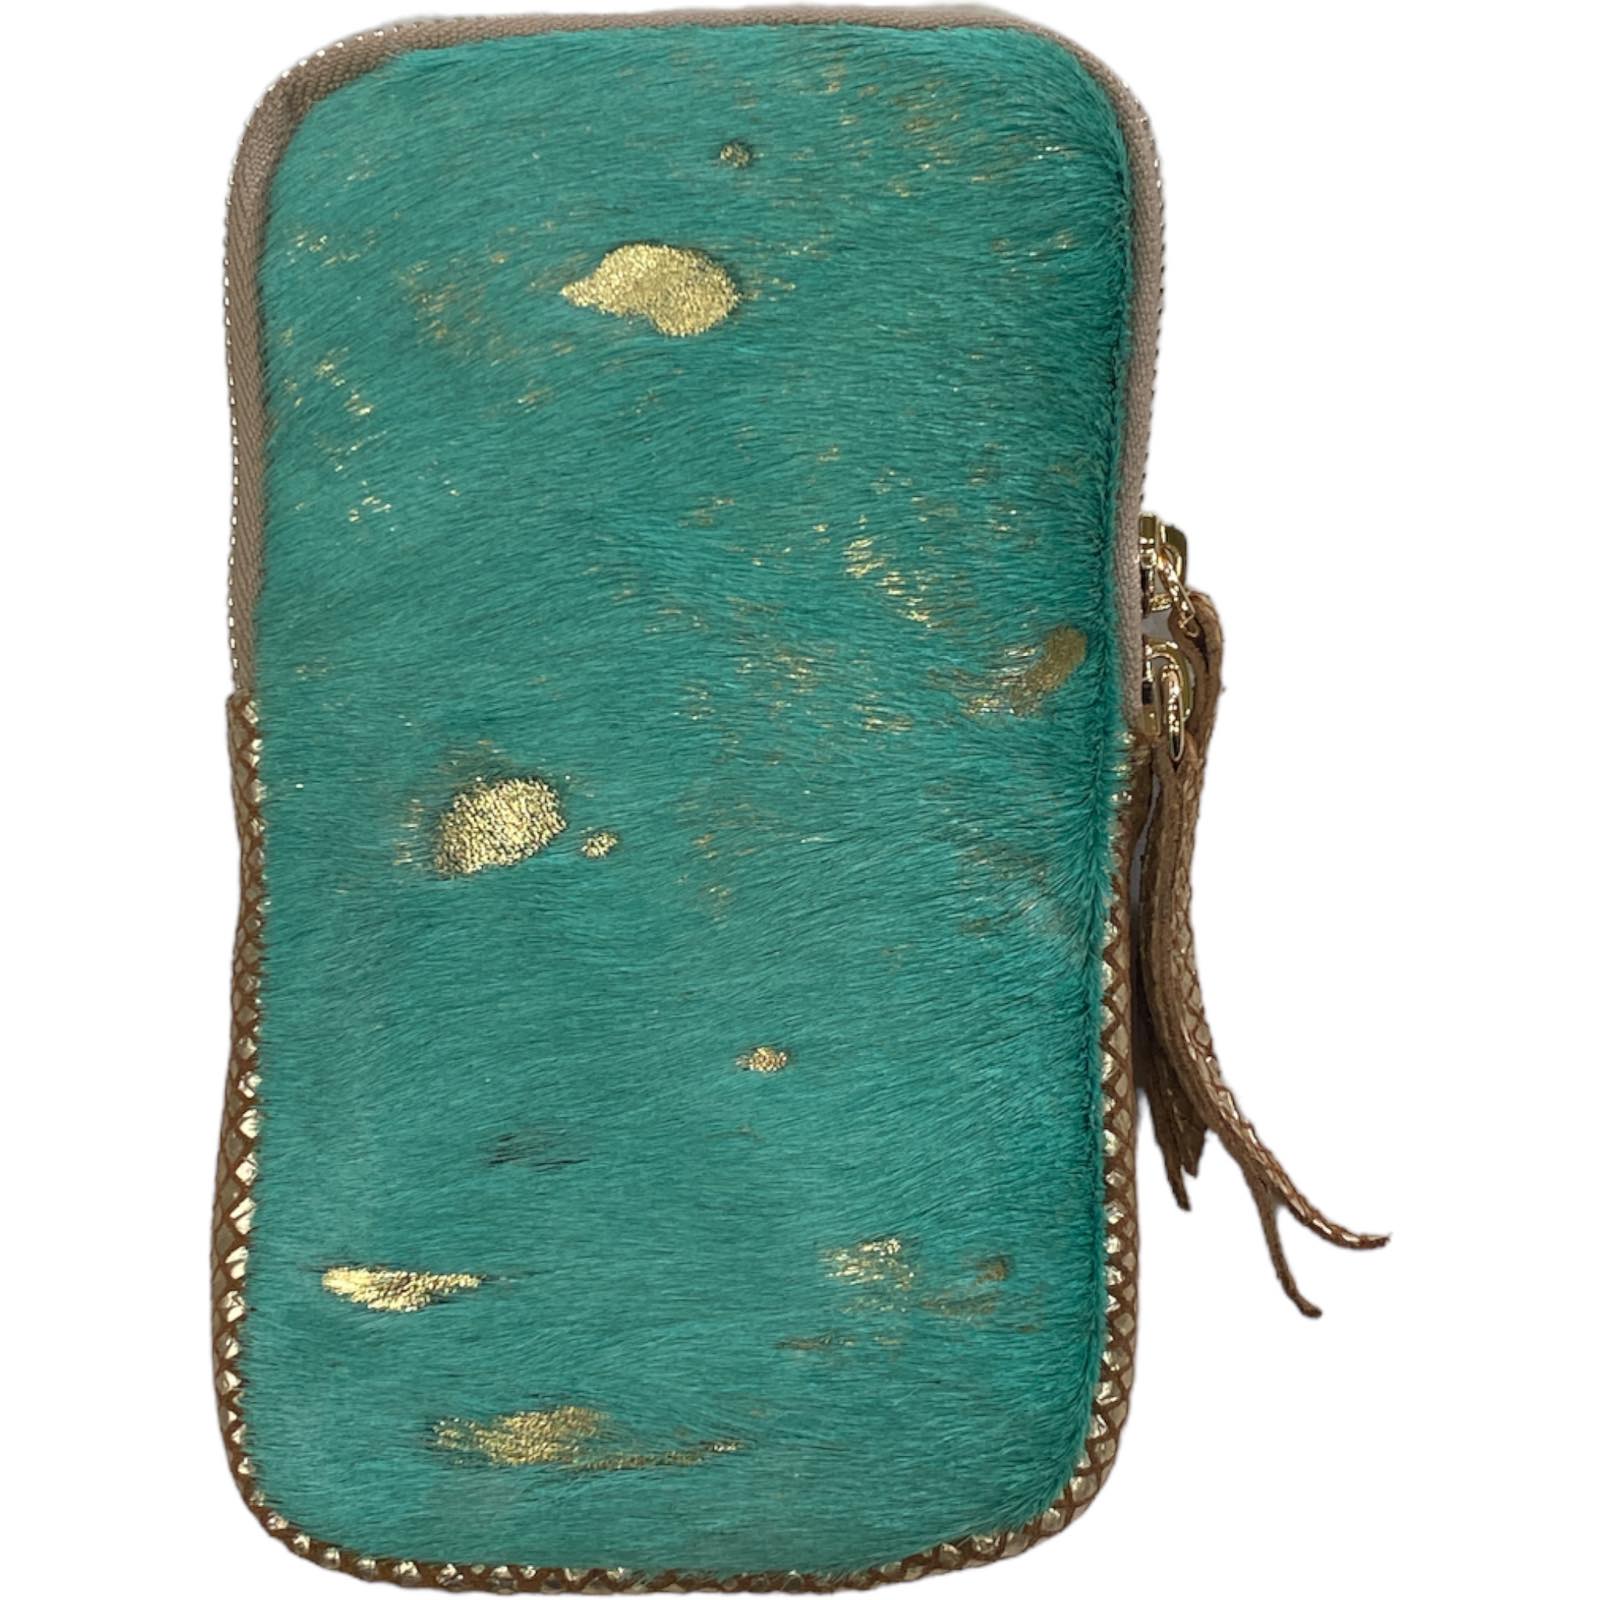 Turquoise vintage calf-hair mobile leather case